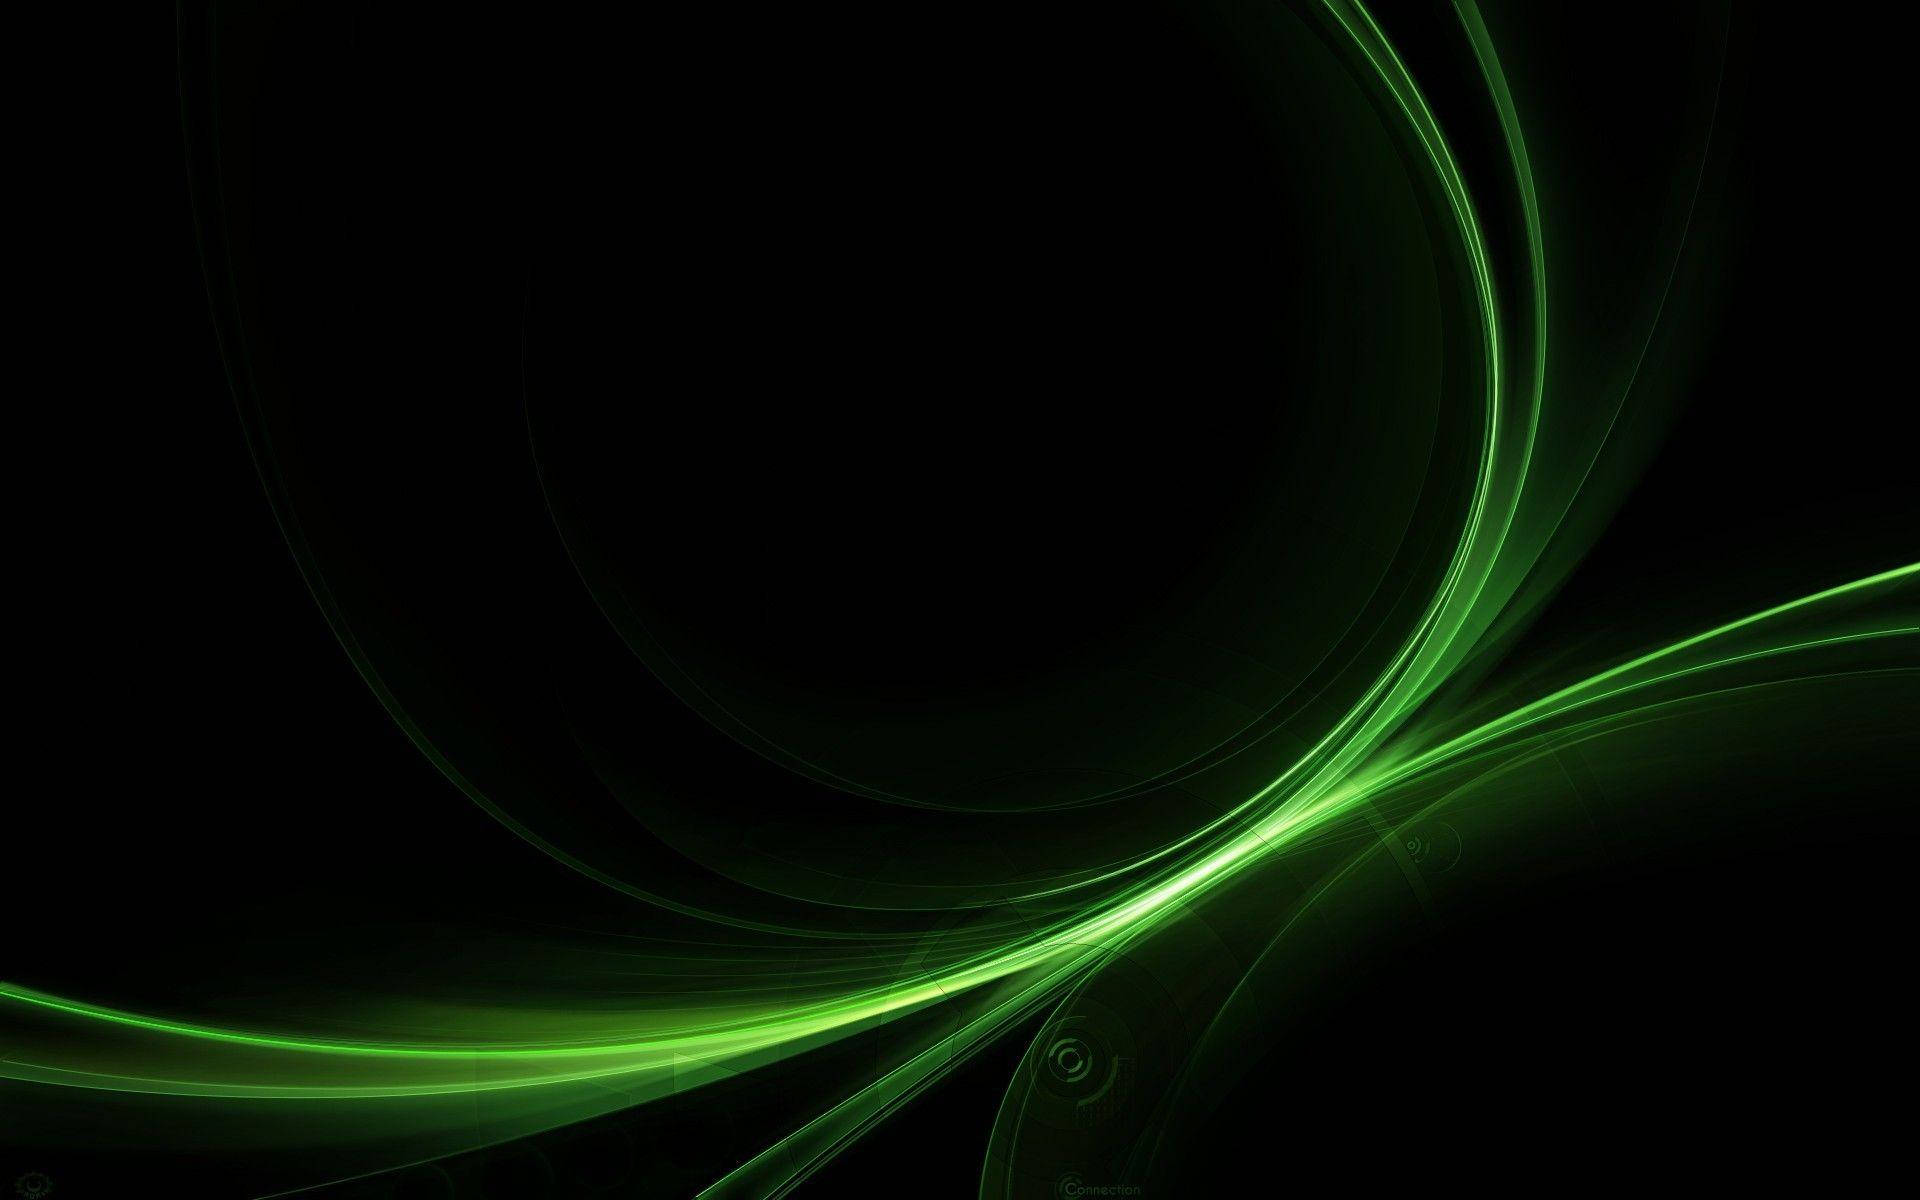 Intertwining Green Rays Abstract Background